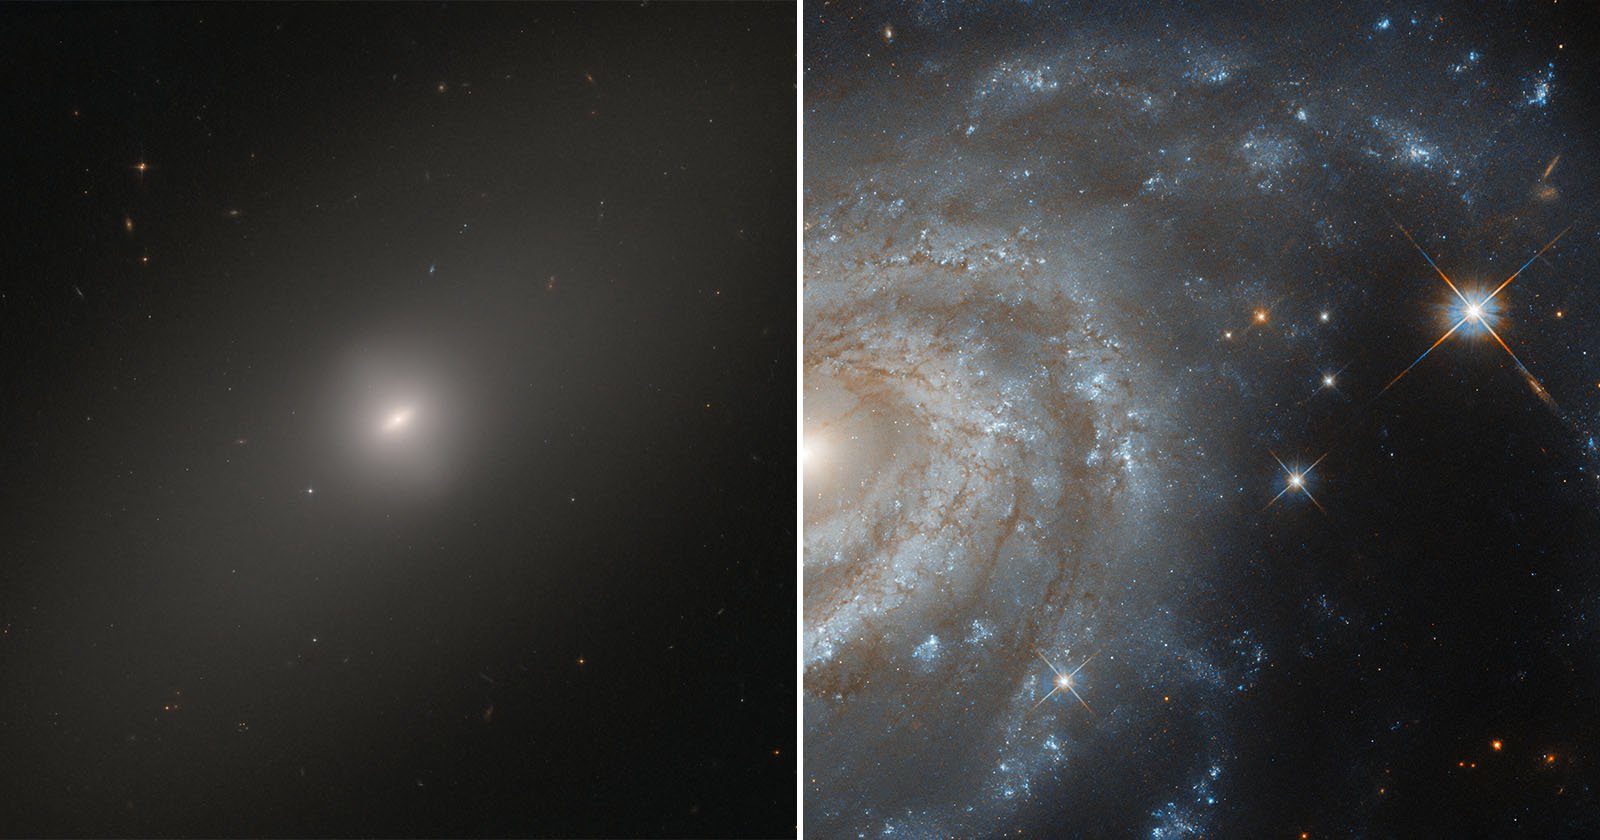  hubble shows peaceful aged galaxy spiraled supernova 